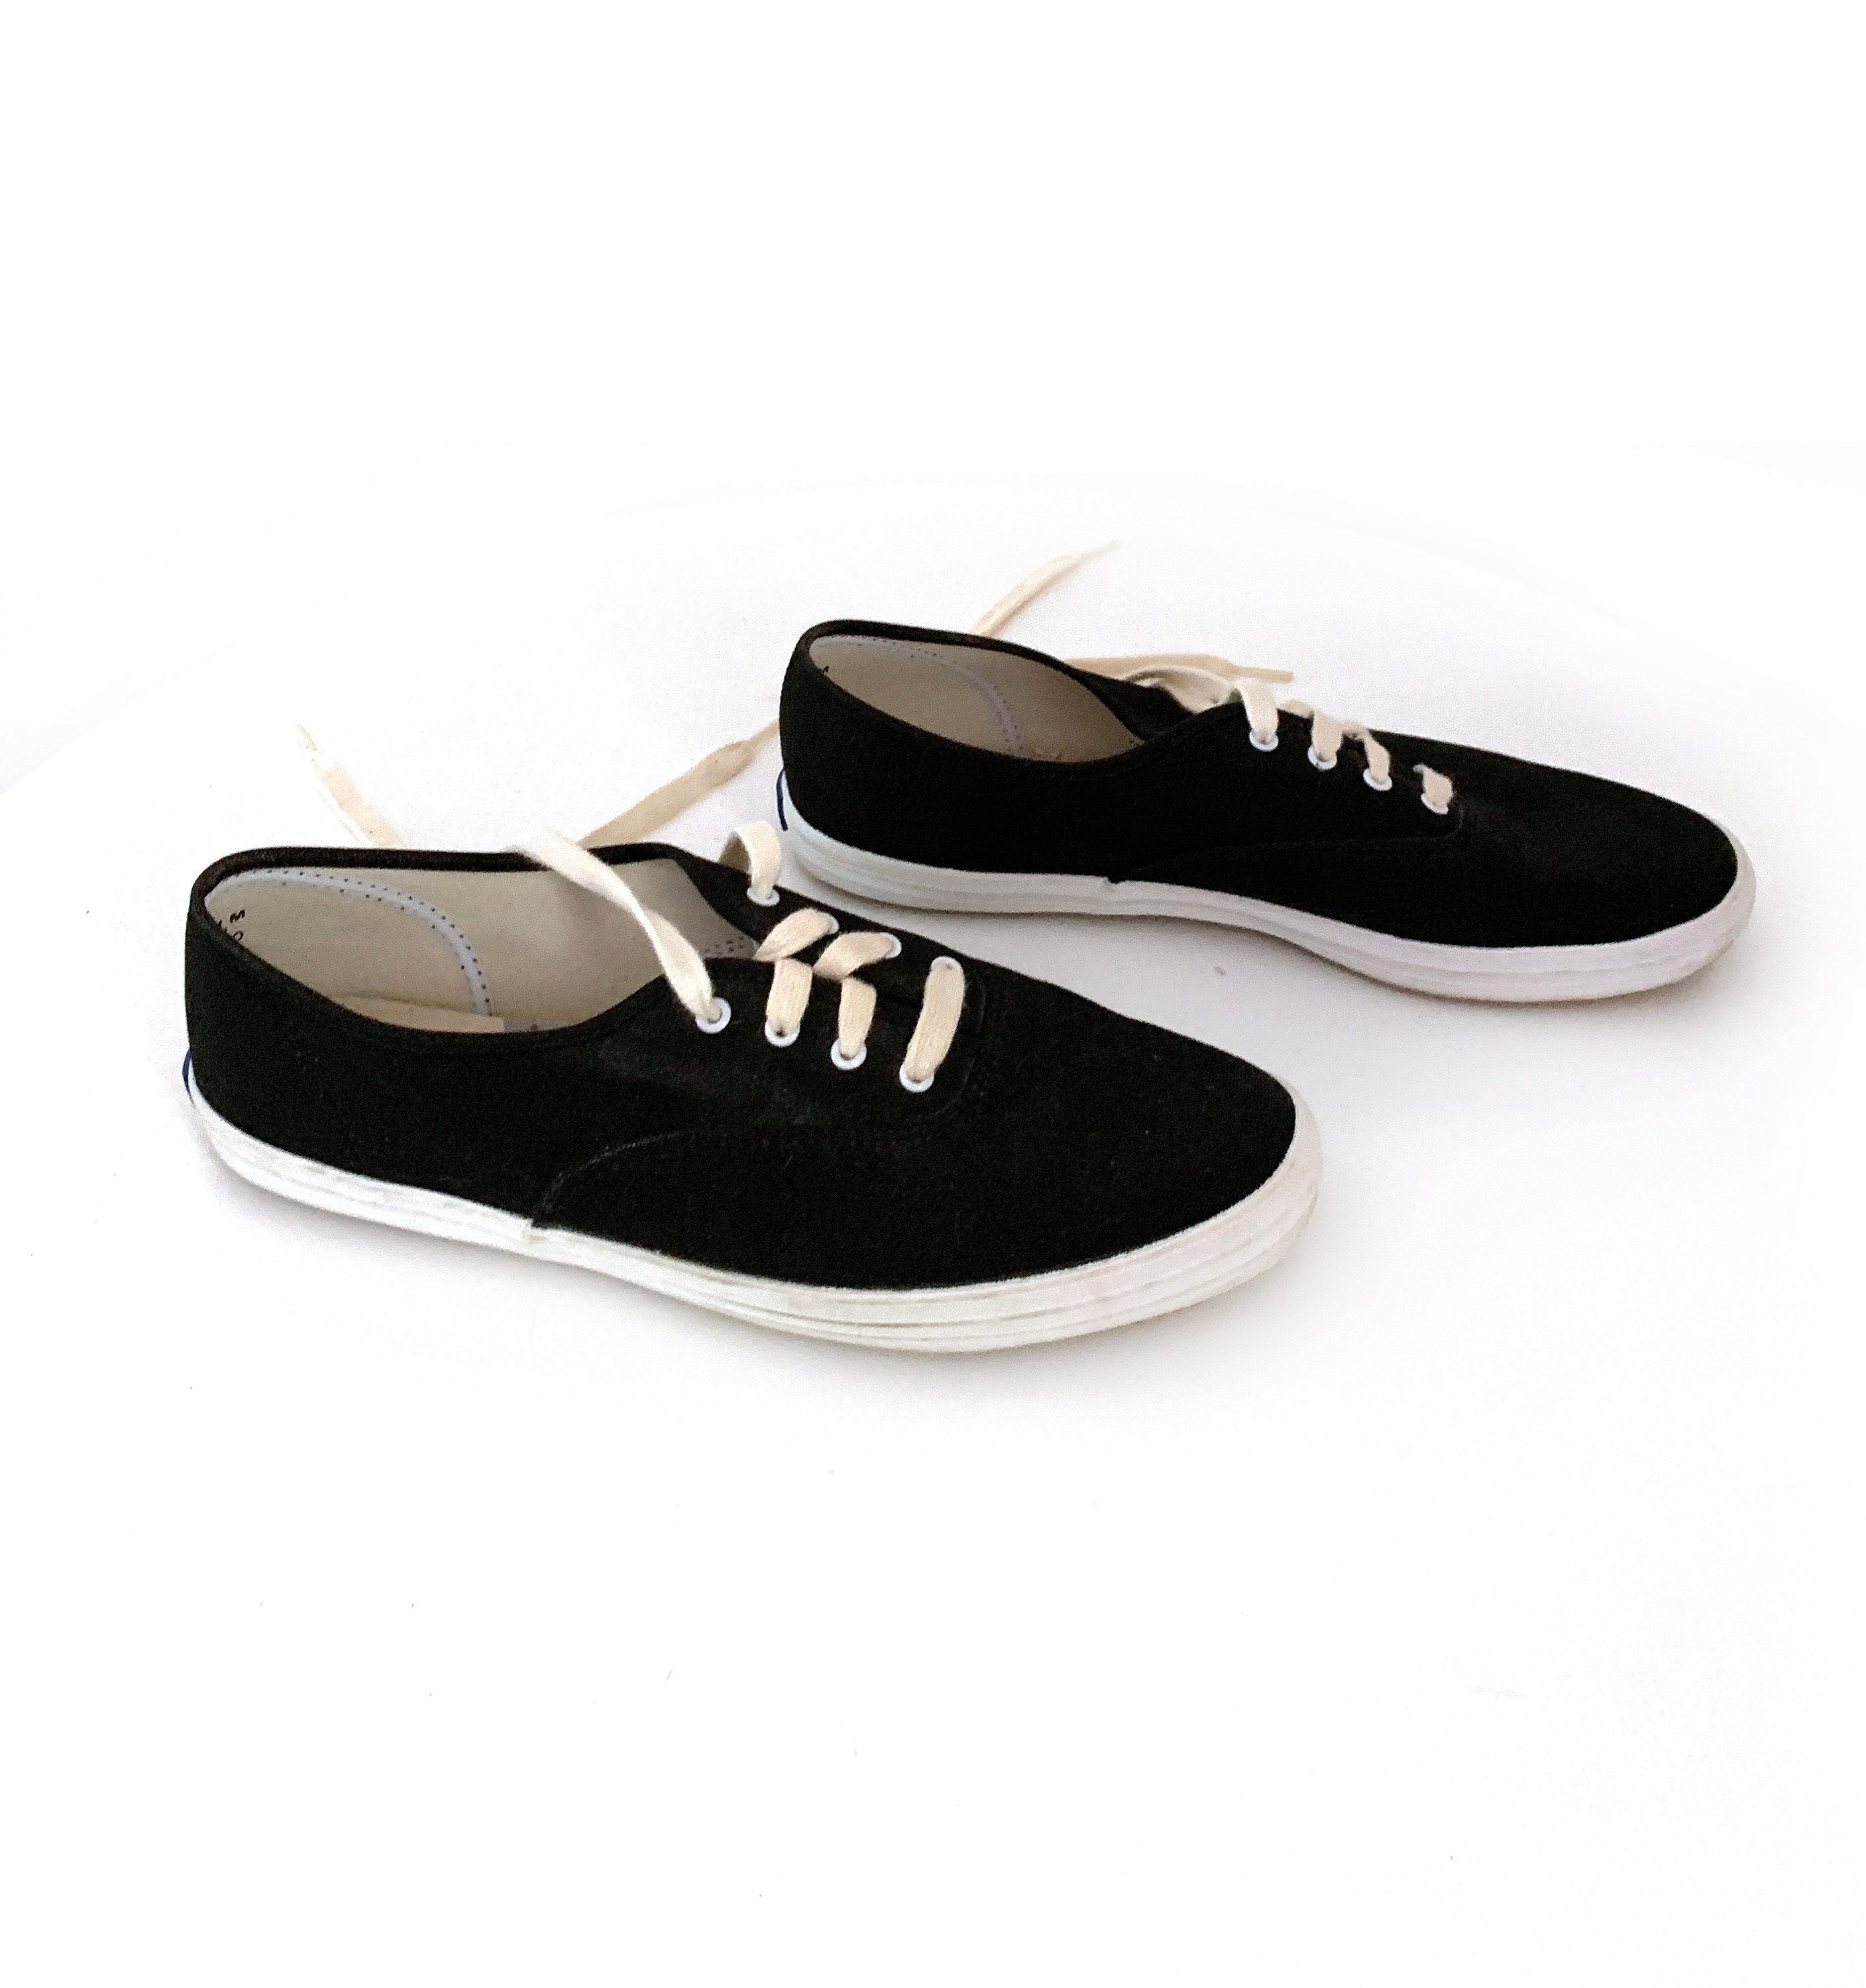 Zsyto Canvas Shoes For Women - Buy Zsyto Canvas Shoes For Women Online at  Best Price - Shop Online for Footwears in India | Flipkart.com